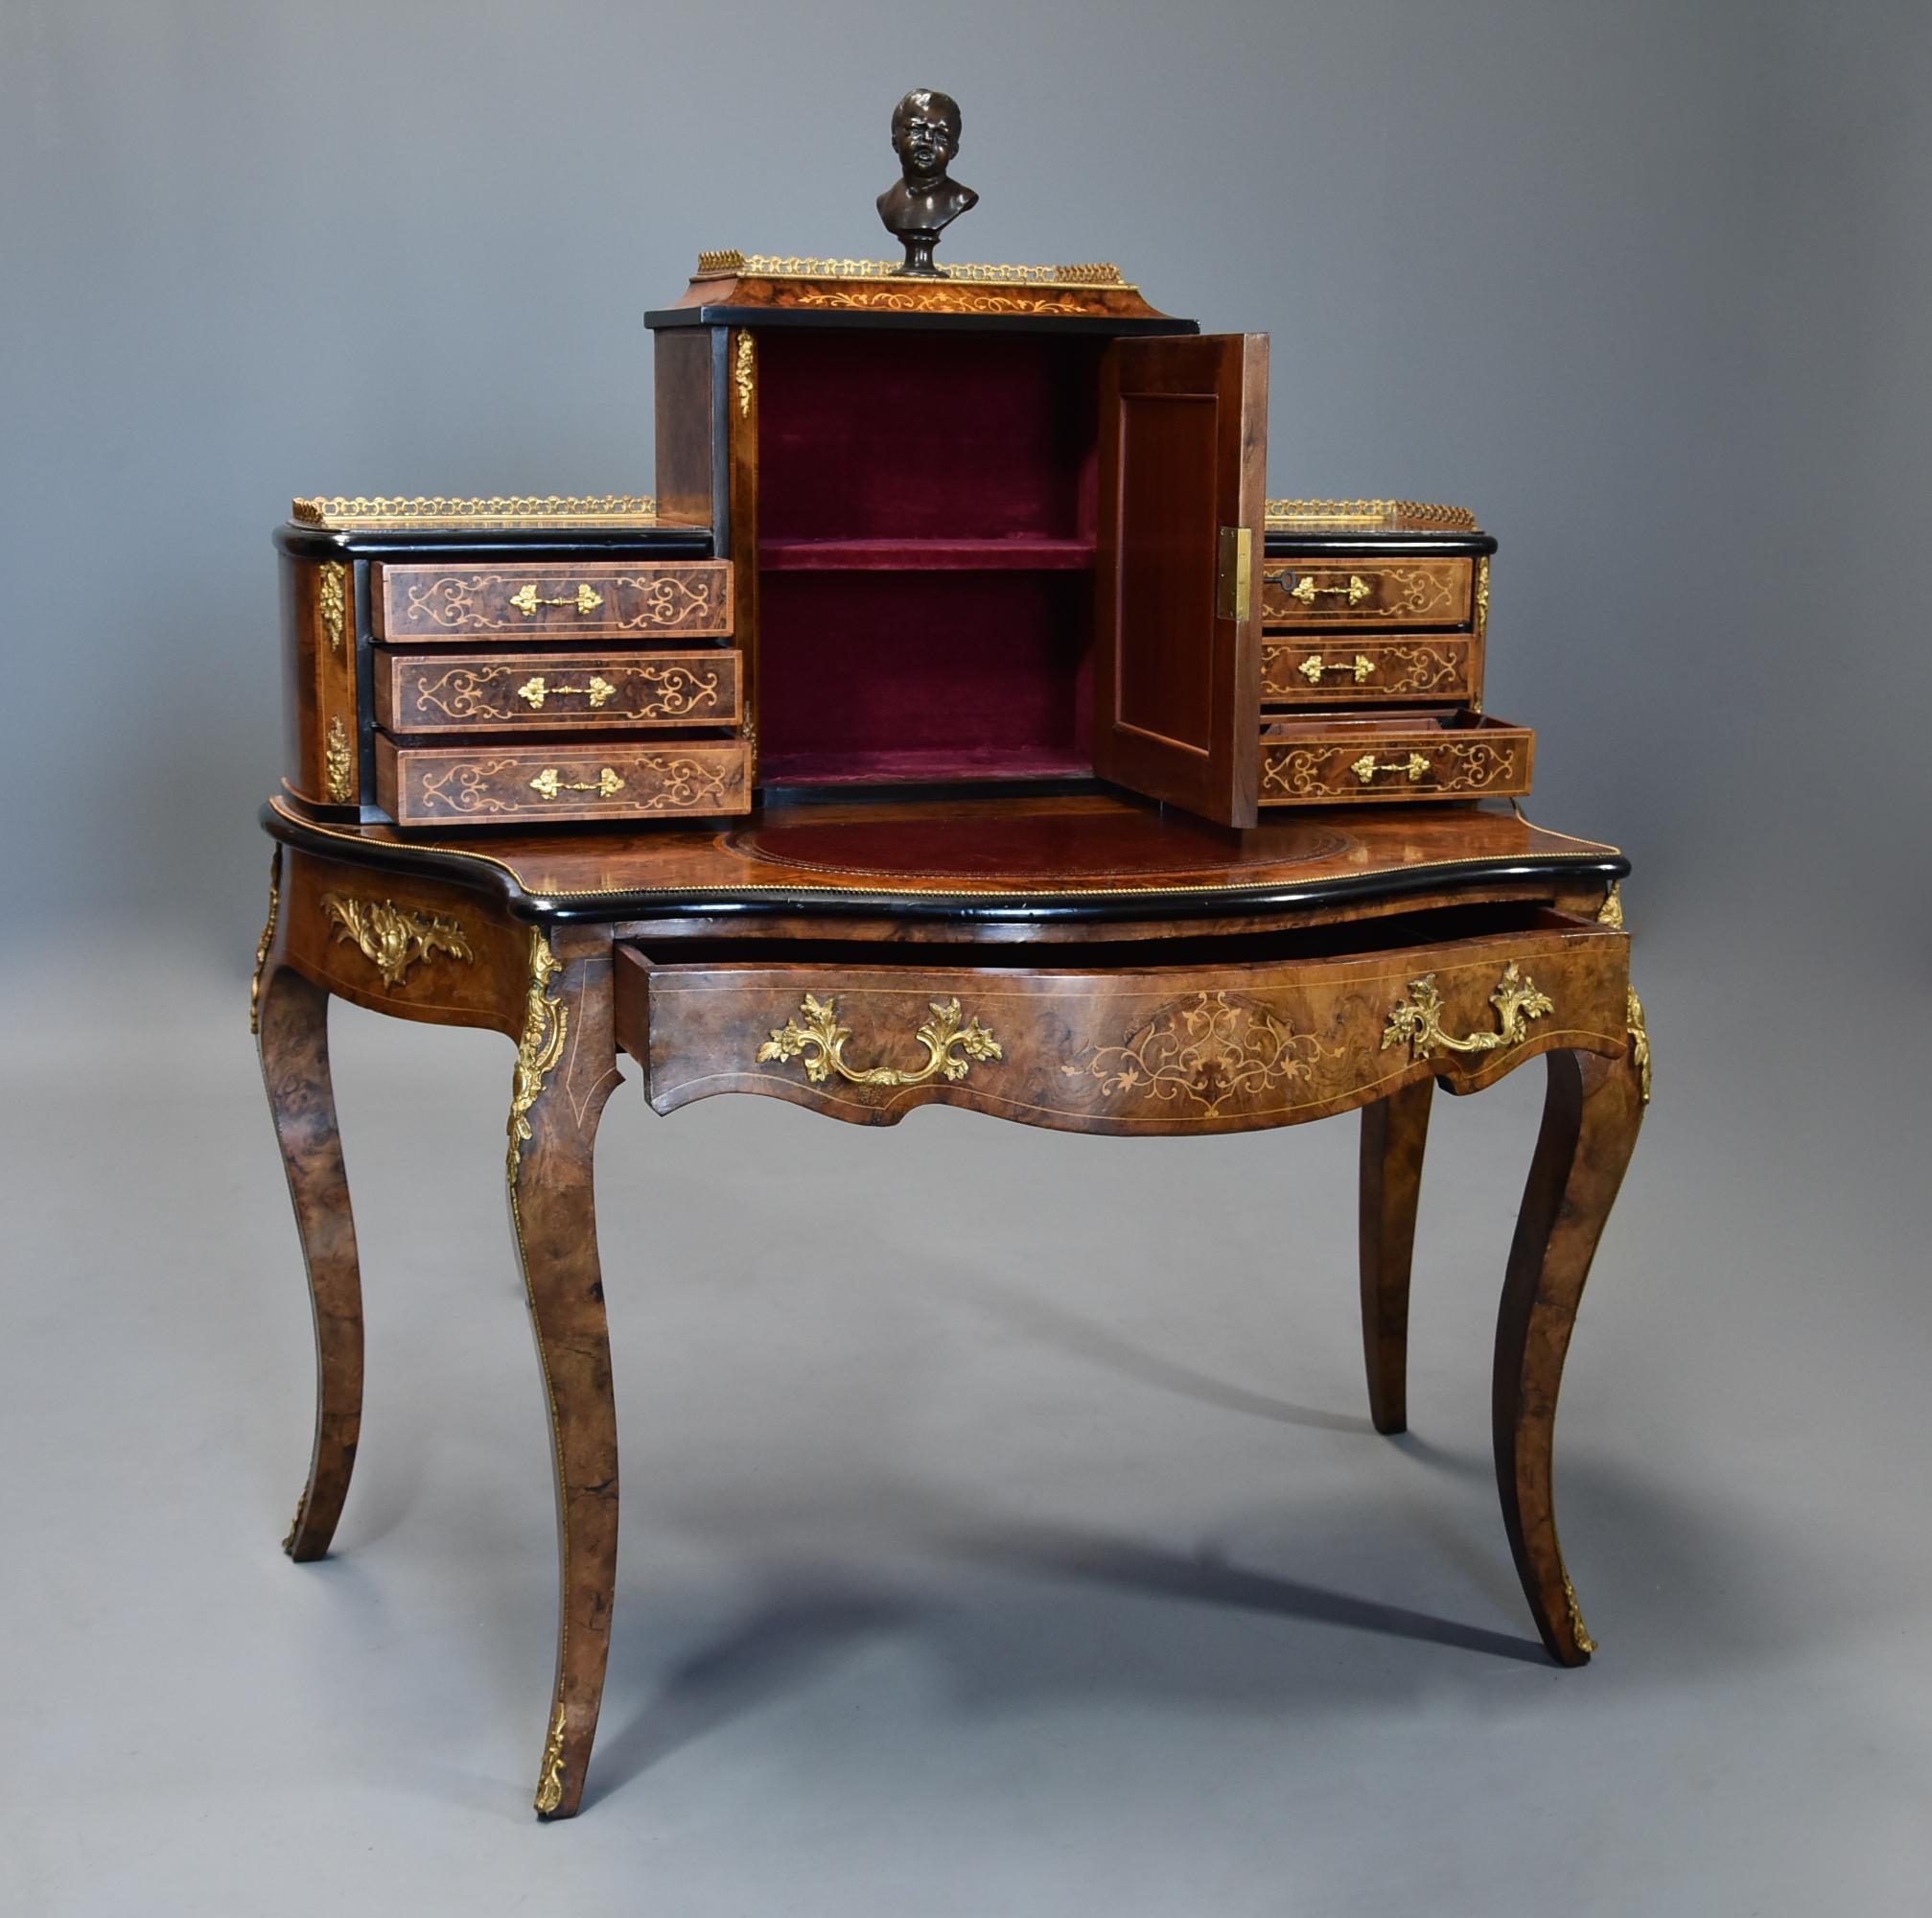 Mid-19th Century Fine Quality Burr Walnut Bonheur de Jour in the French Style For Sale 5